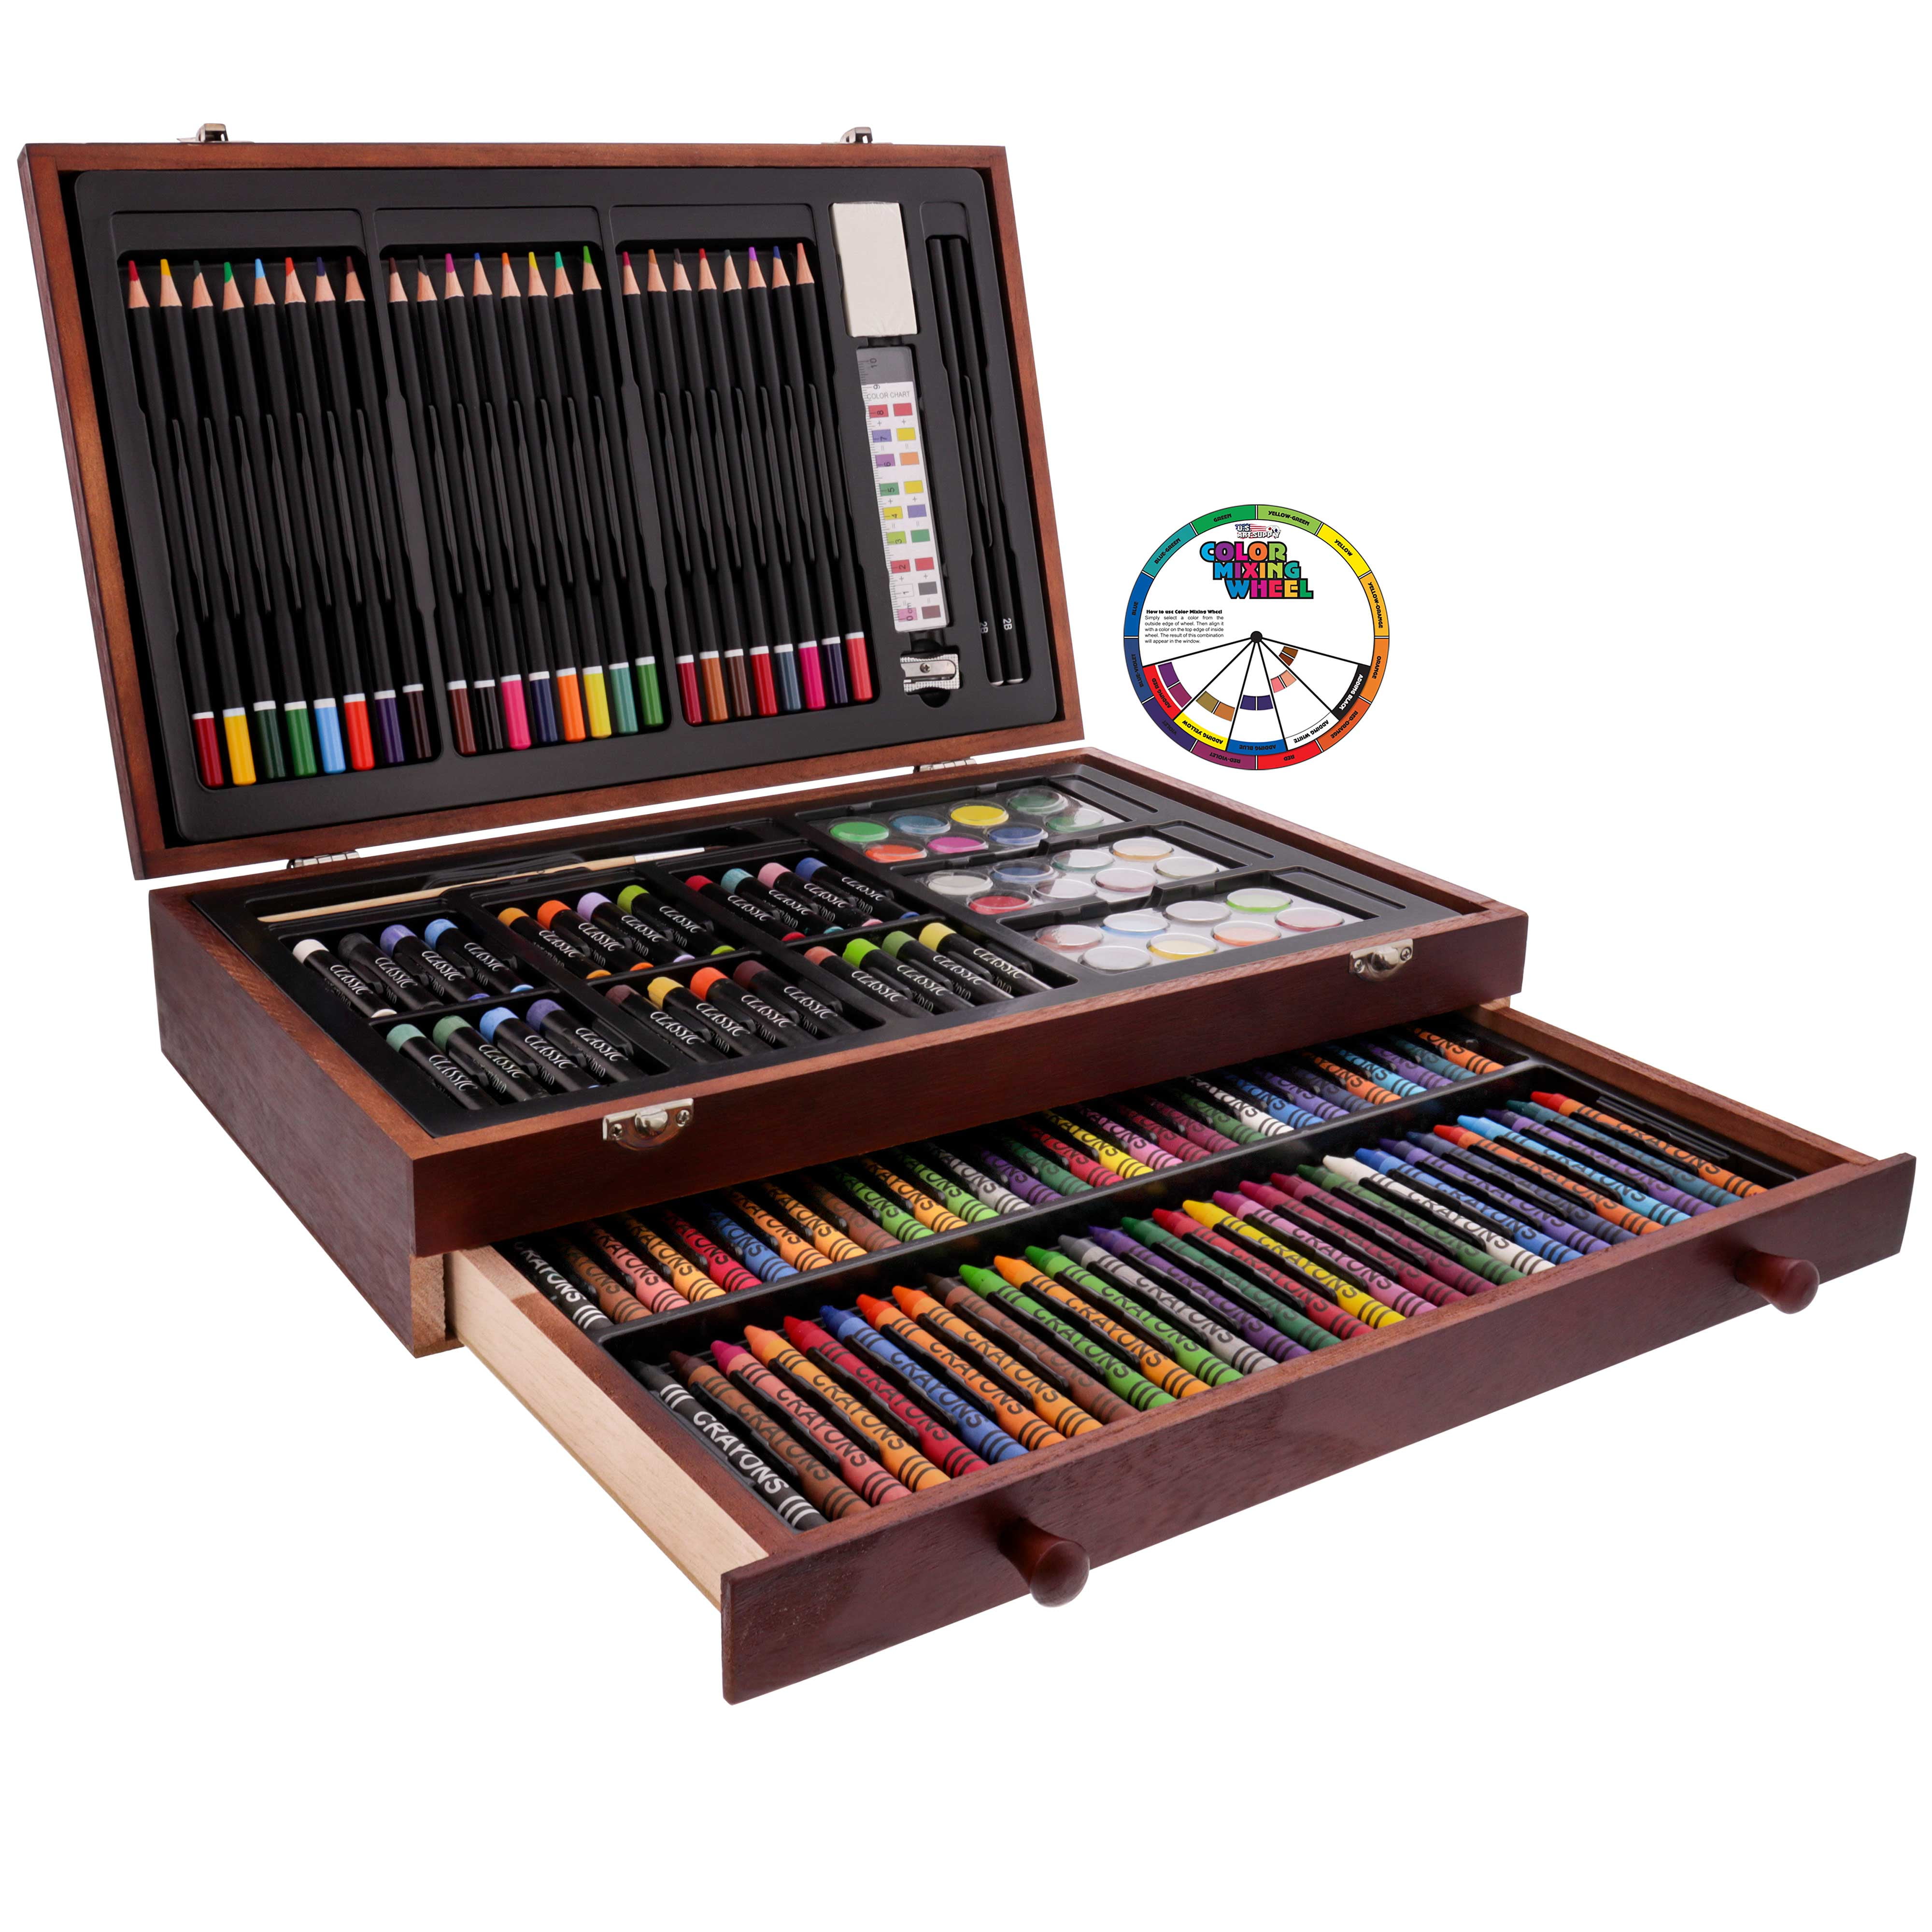 Personalized 80-piece Deluxe Art Set W/wood Carrying Case Colorful Designs  Arts & Crafts for Kids Choose From 5 Colorful Designs 